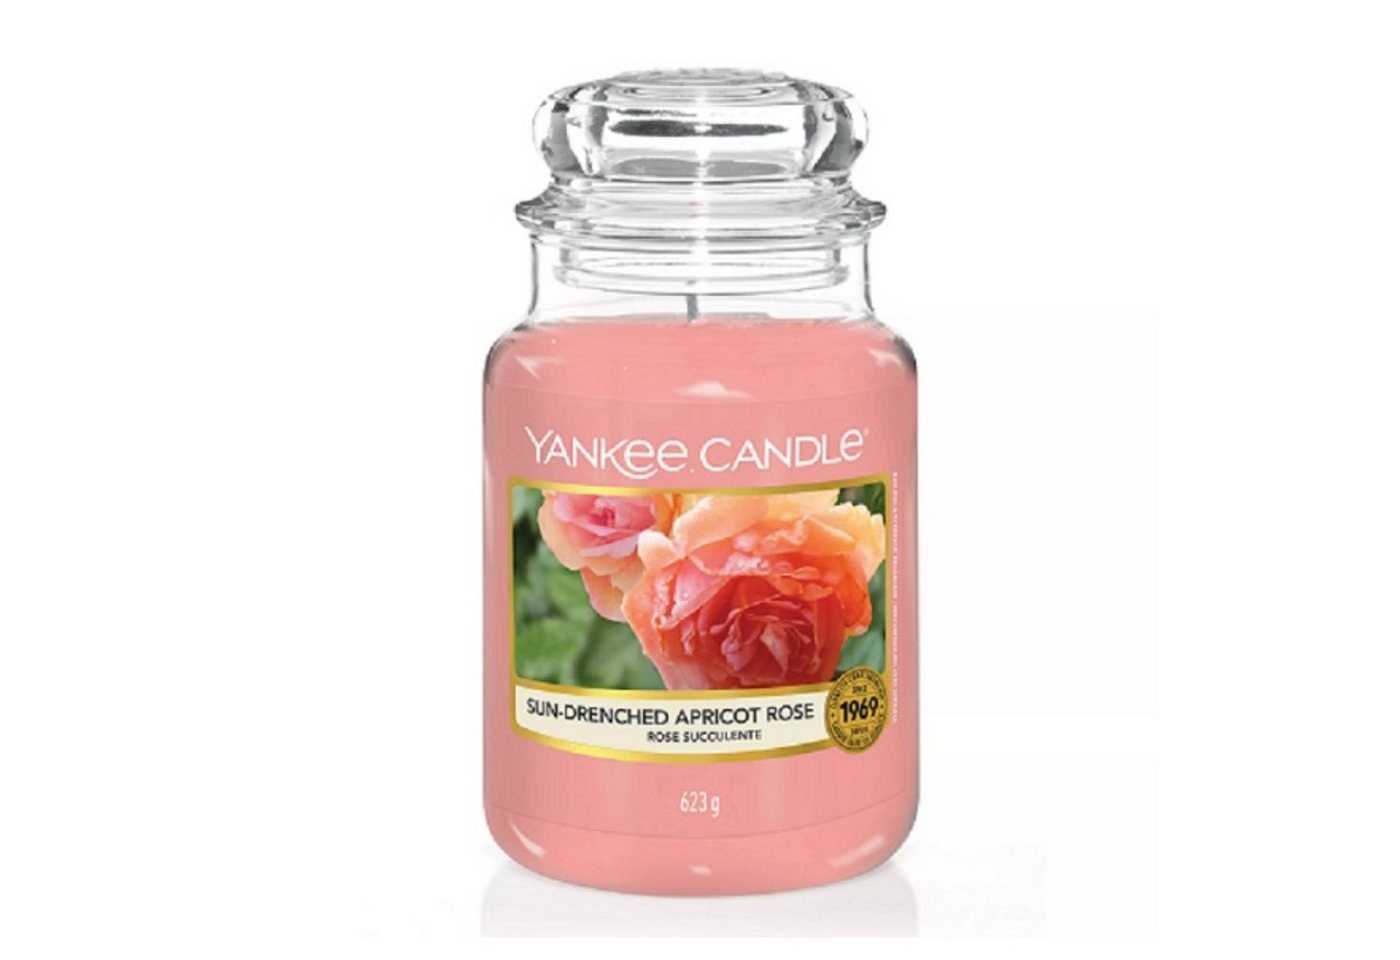 Yankee Candle Duftkerze Yankee Candle Sun-Drenched Apricot Rose Duftkerze im Glas 623g Fruchti von Yankee Candle